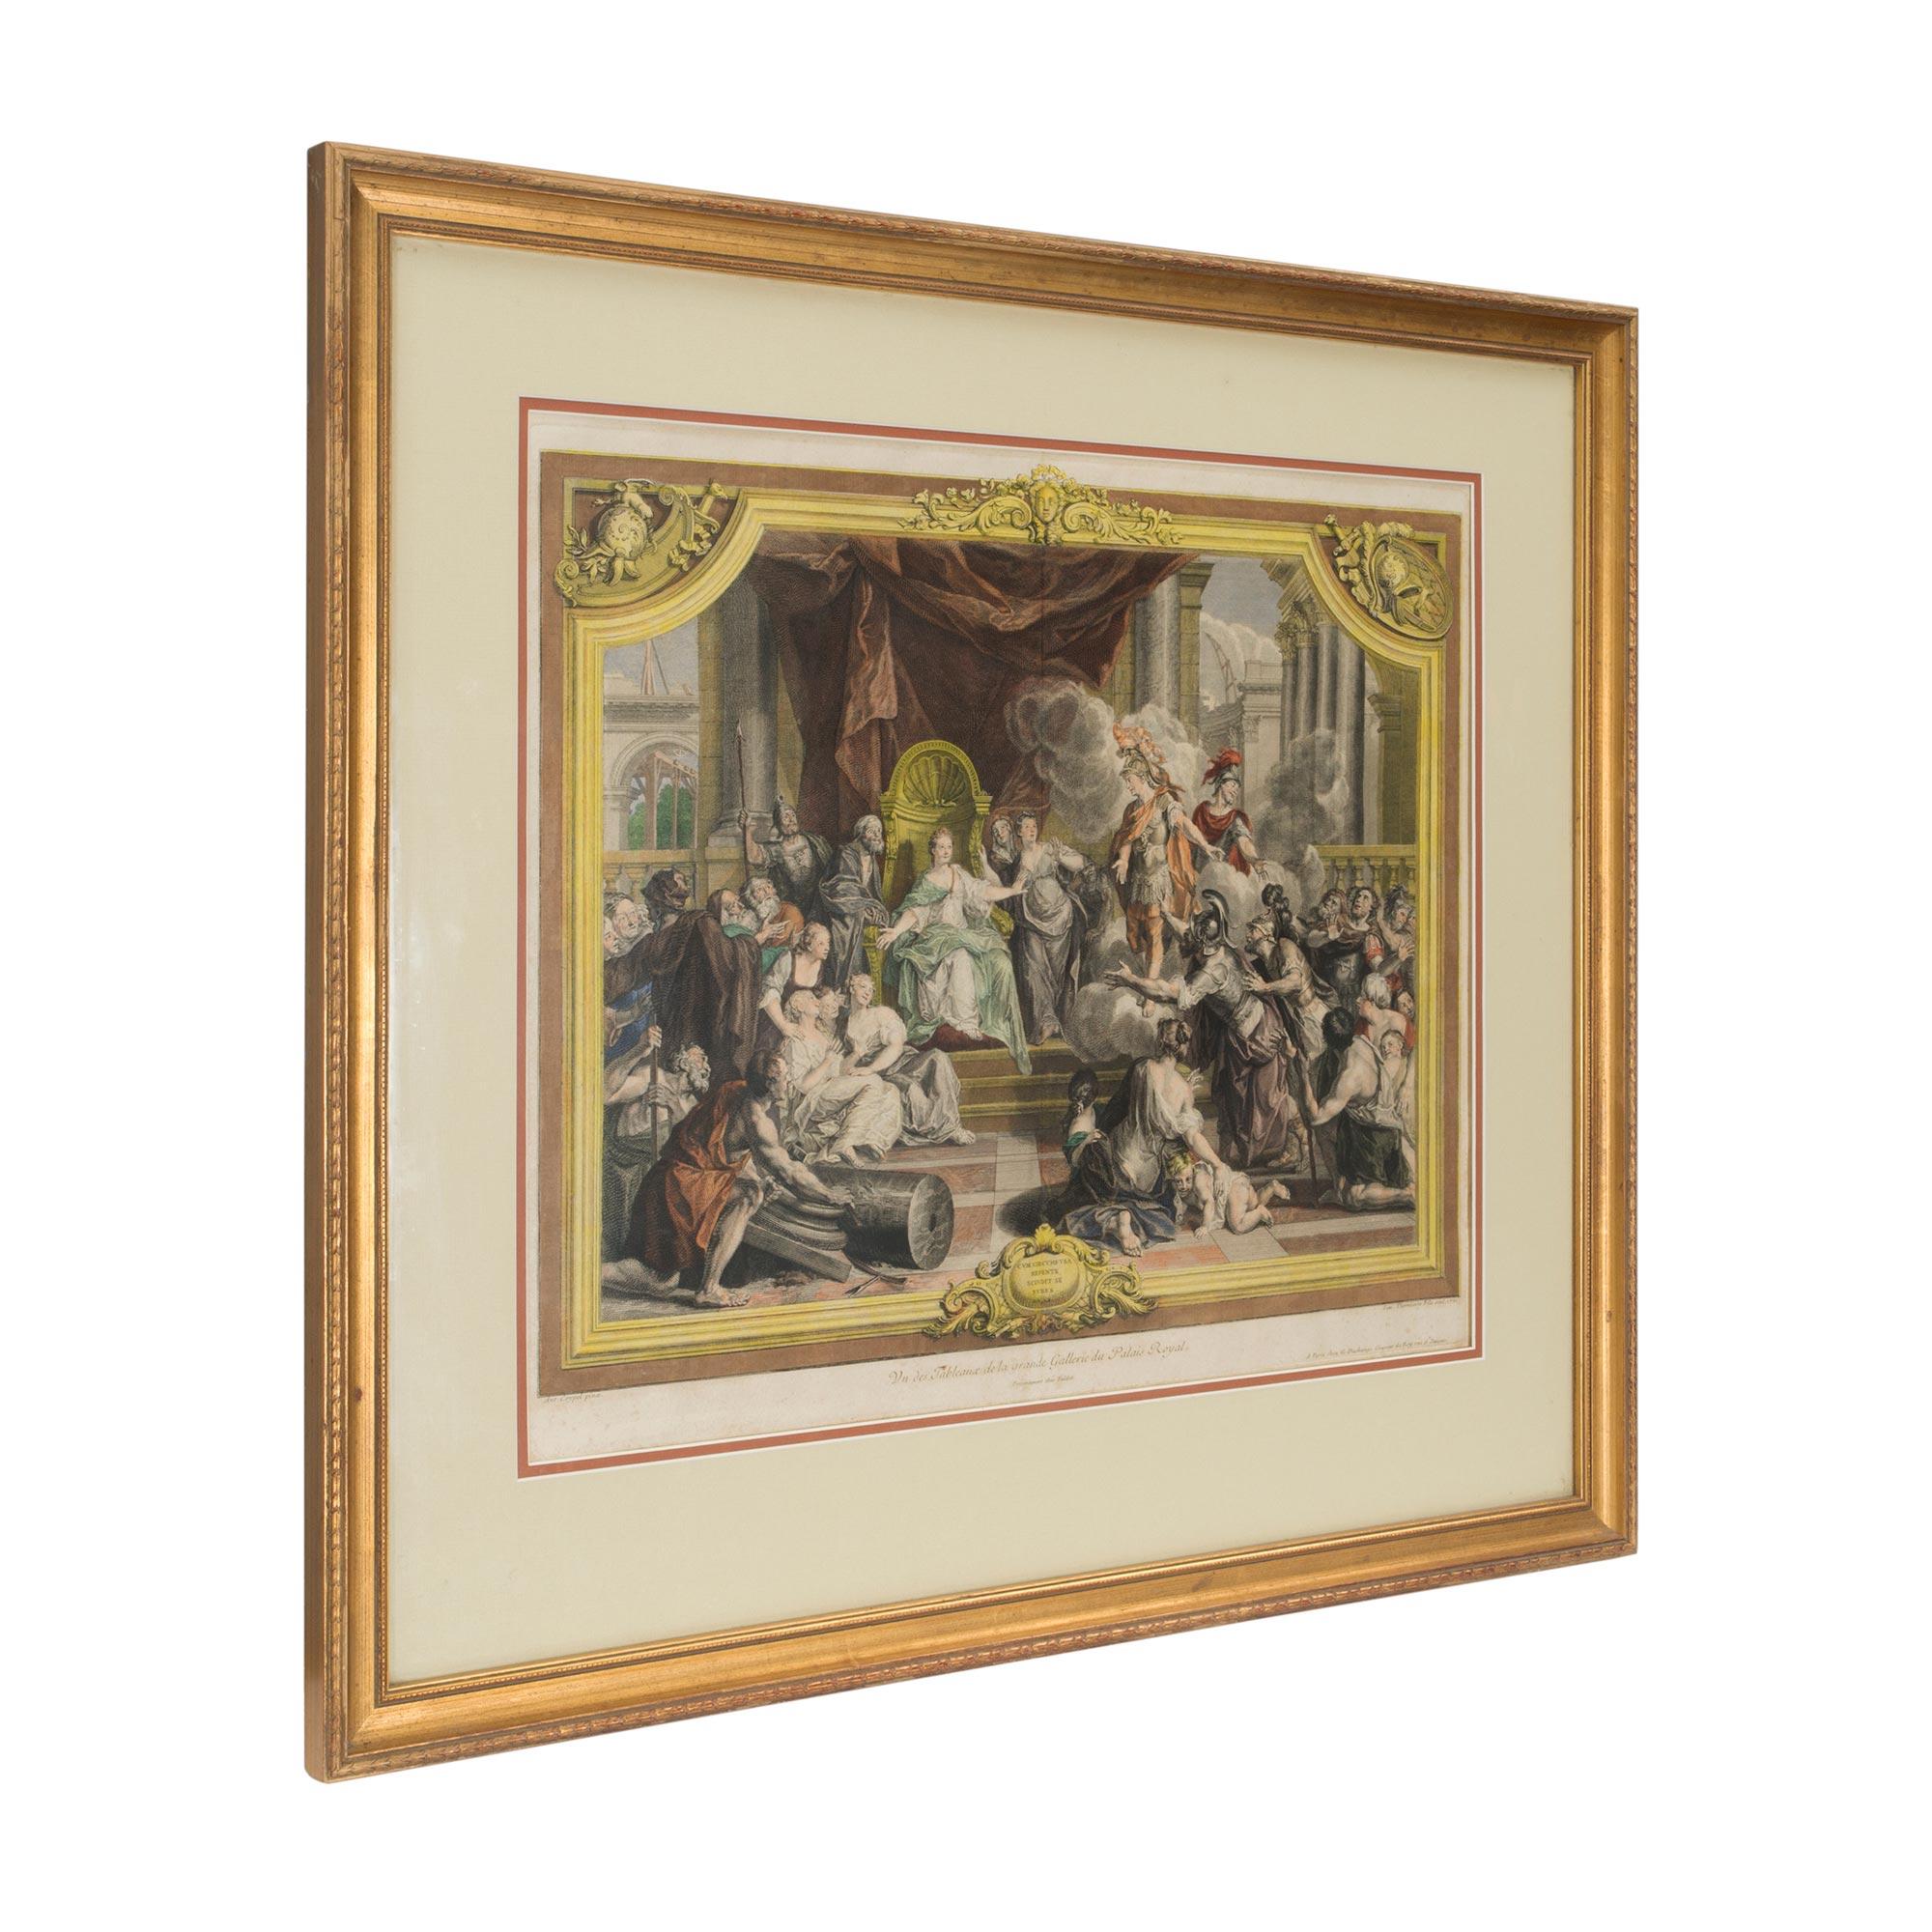 A fine French 18th century Louis XVI st. print titled: Un des Tableaux de la grande Gallerie du Palais Royal (one of the paintings of the grand Gallery of the Royal Palace). The print likely depicts a painting at the Royal Palace of a maiden seated